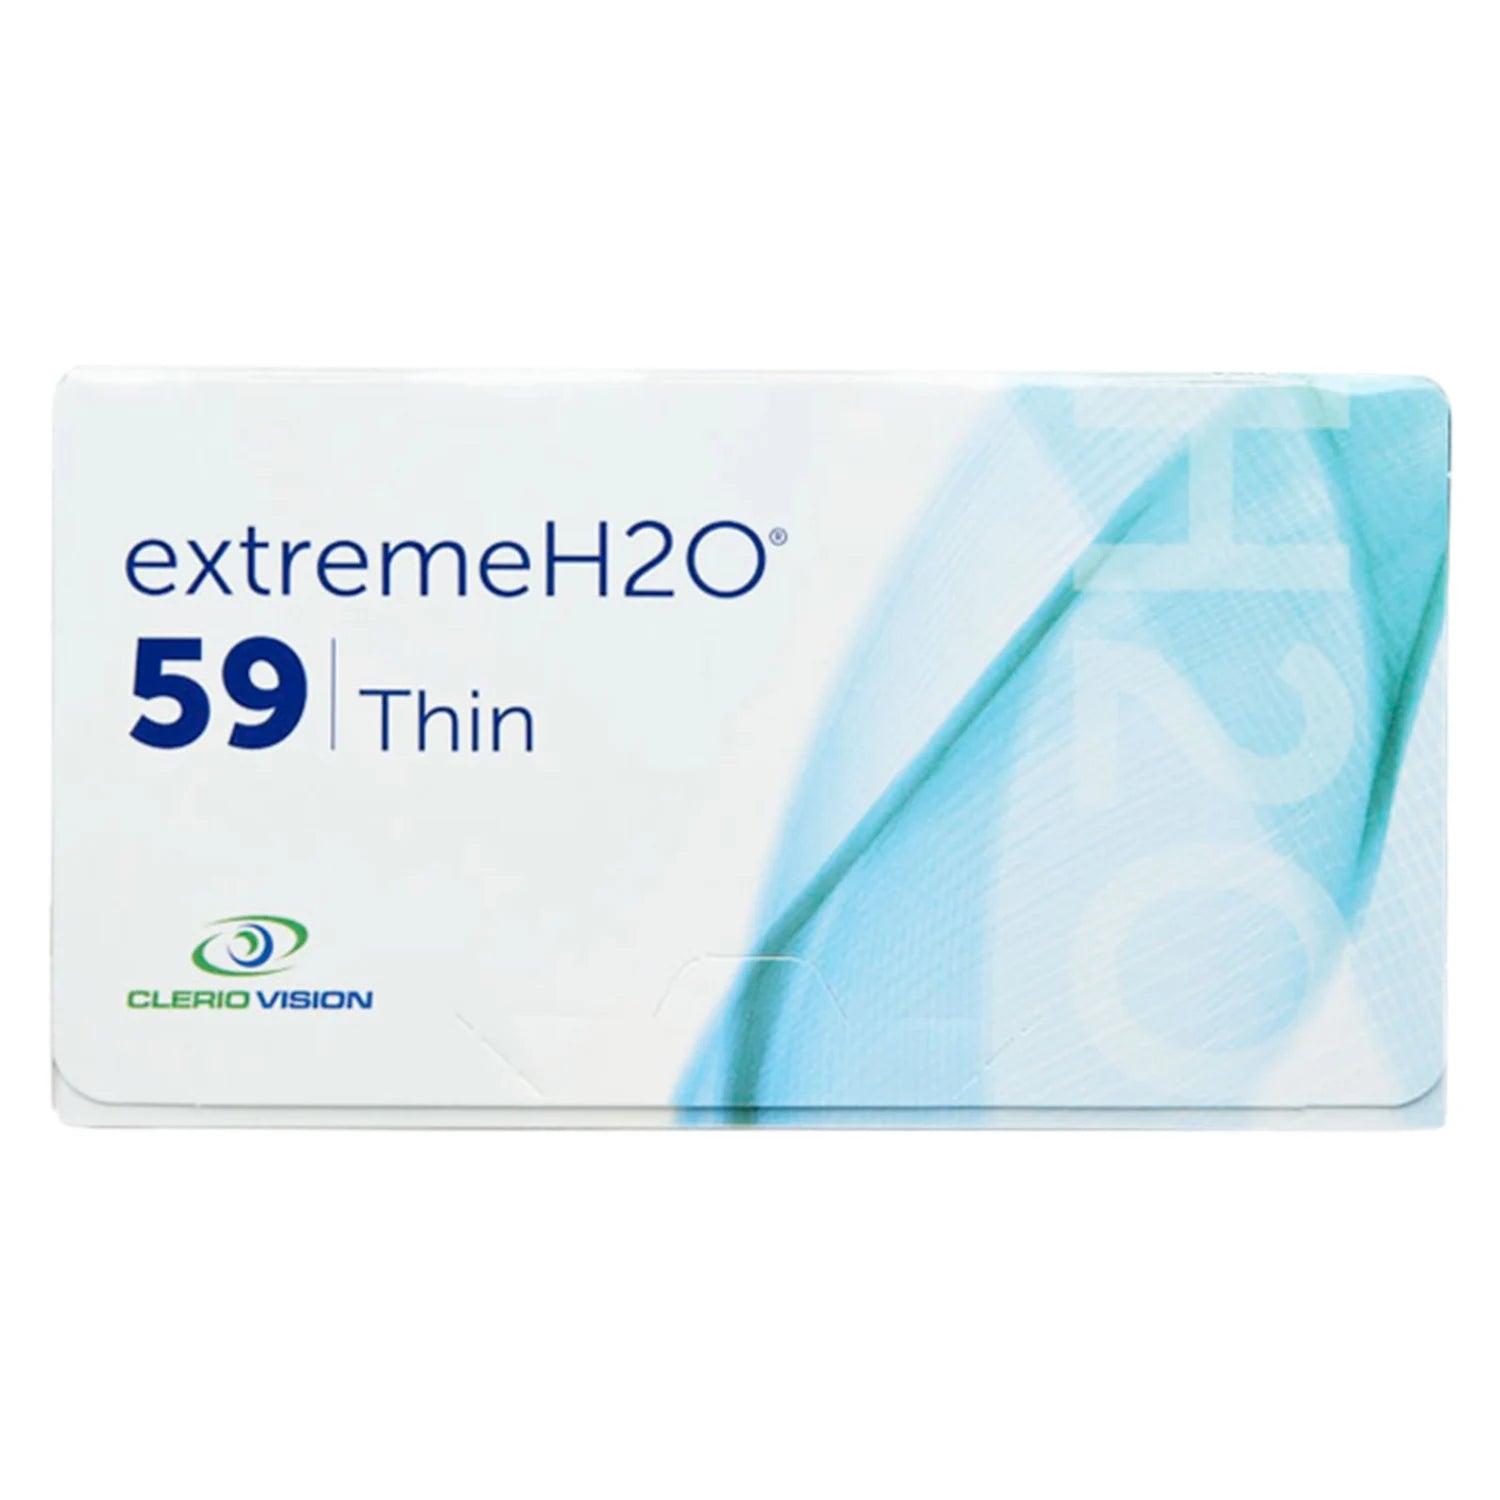 Extreme H20 certified contact lenses